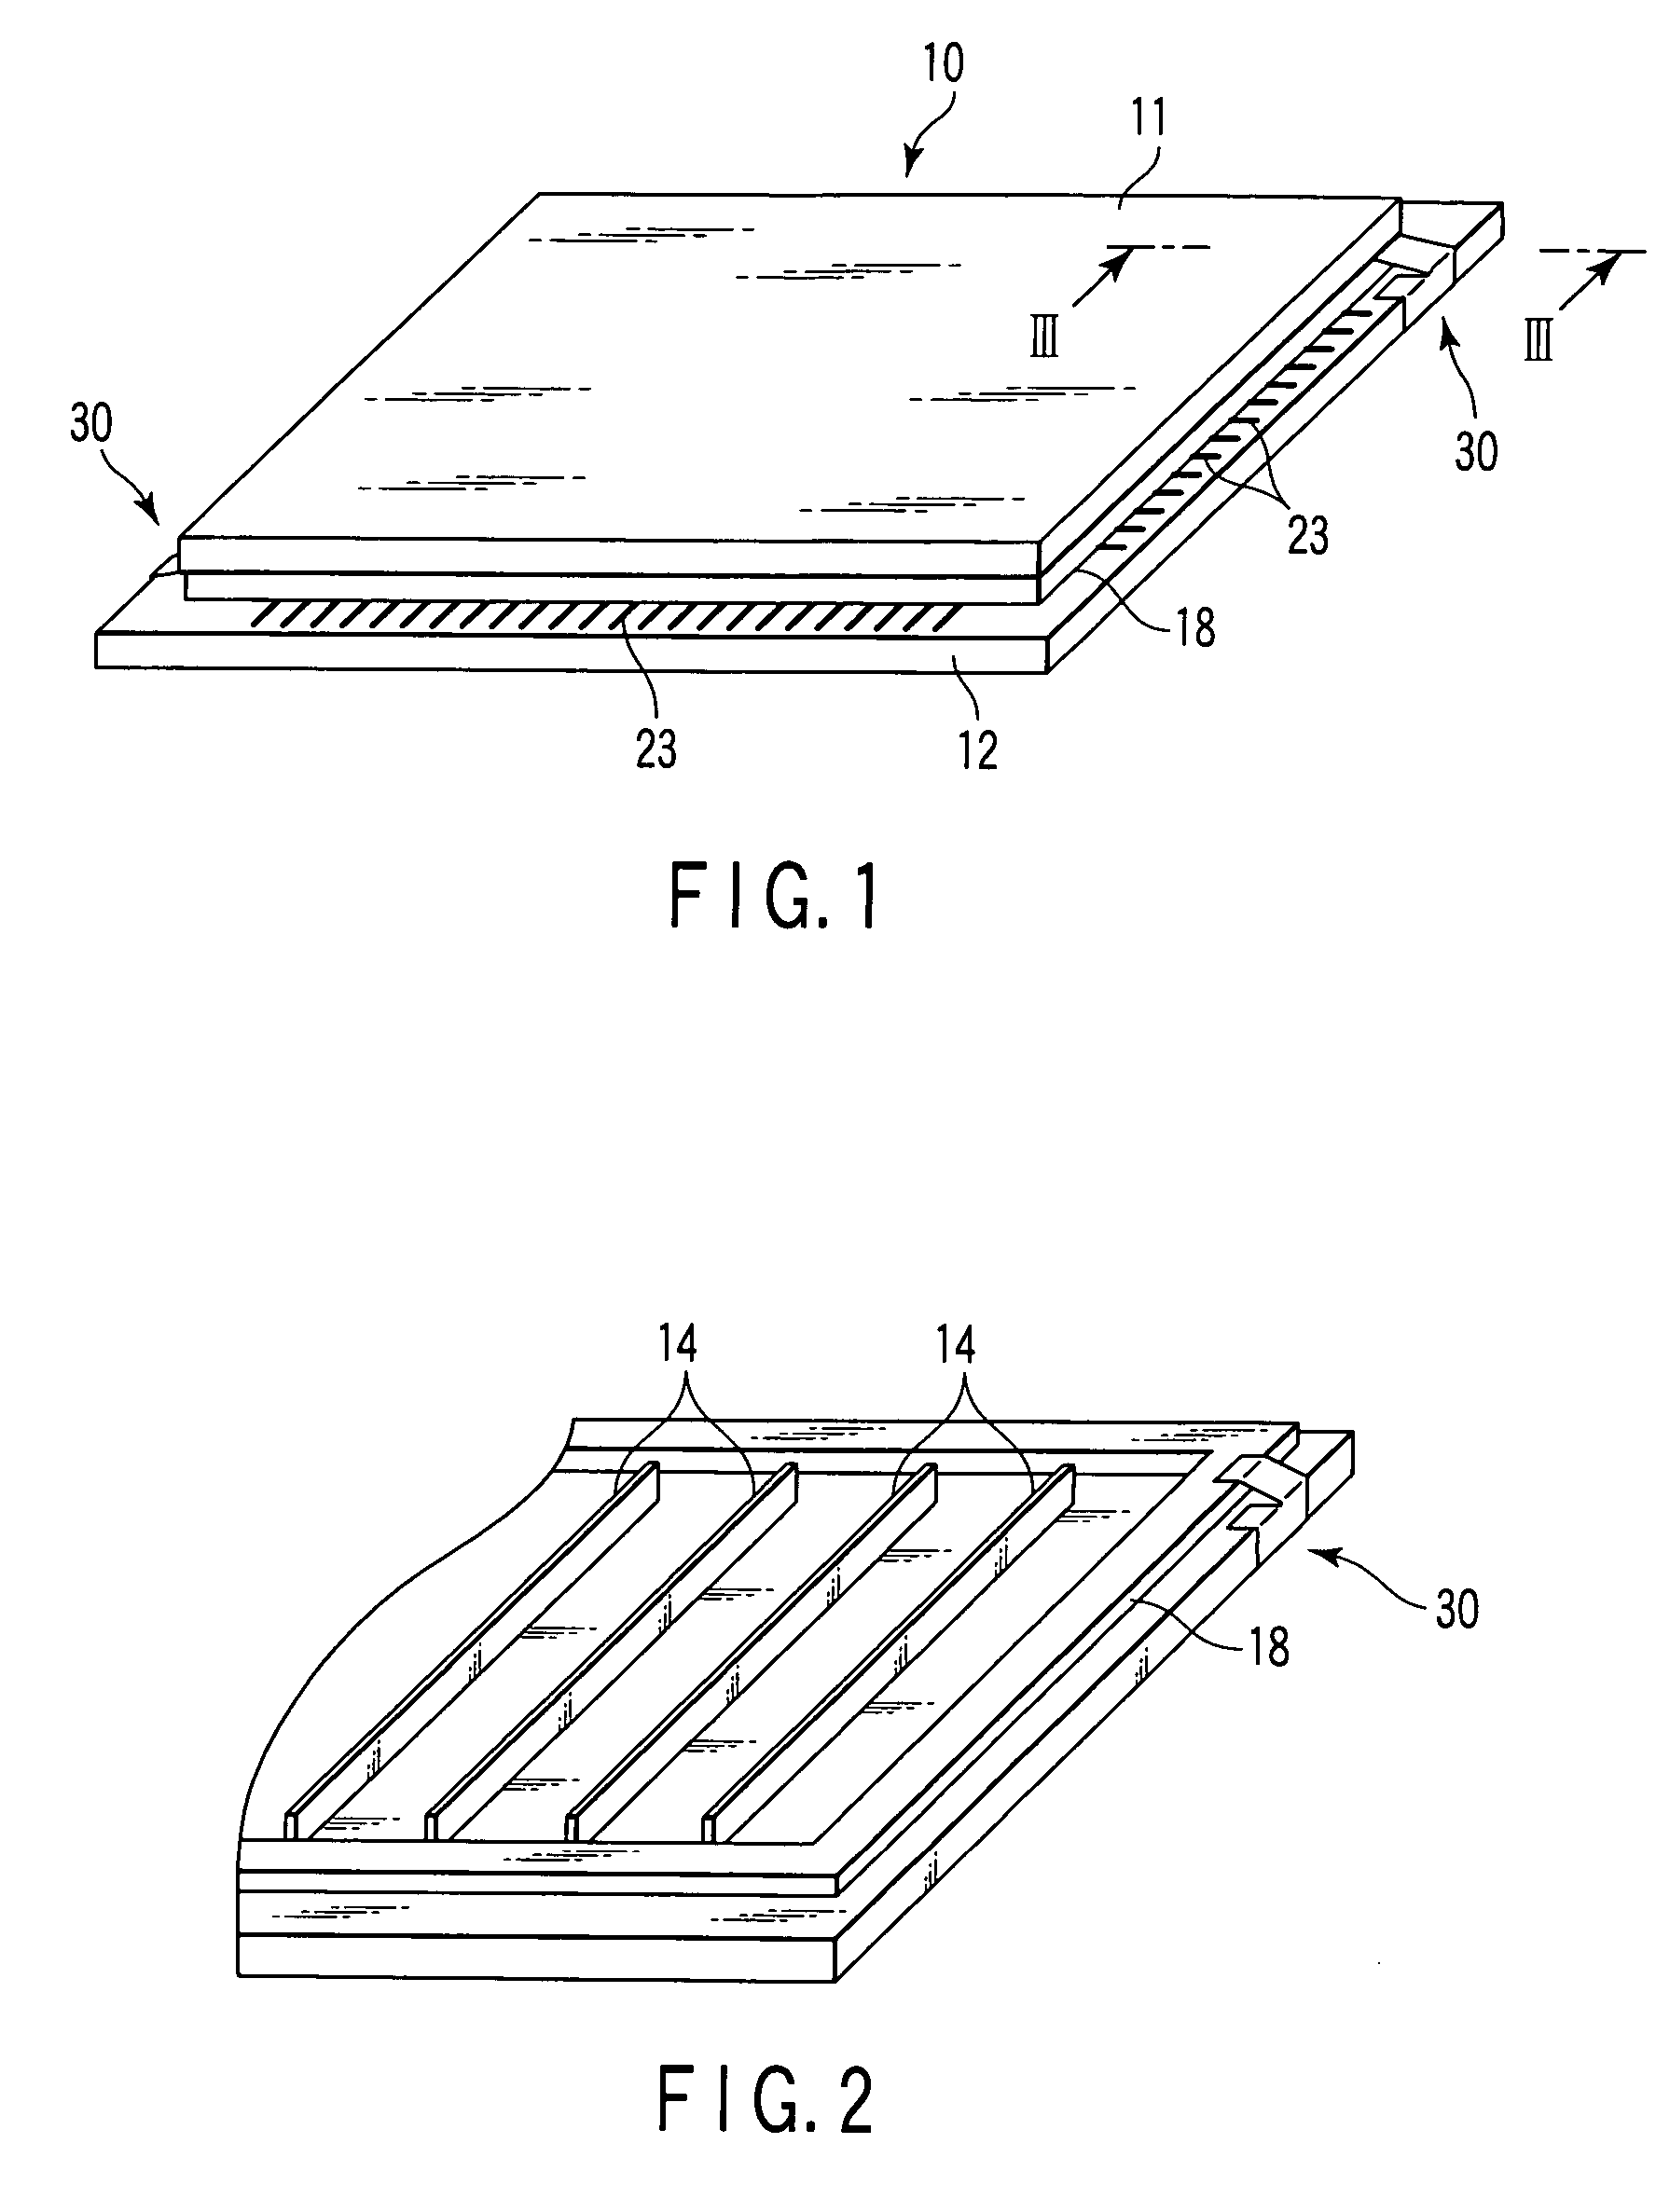 Method of bonding display substrates by application of an electric current to heat and melt a bonding material